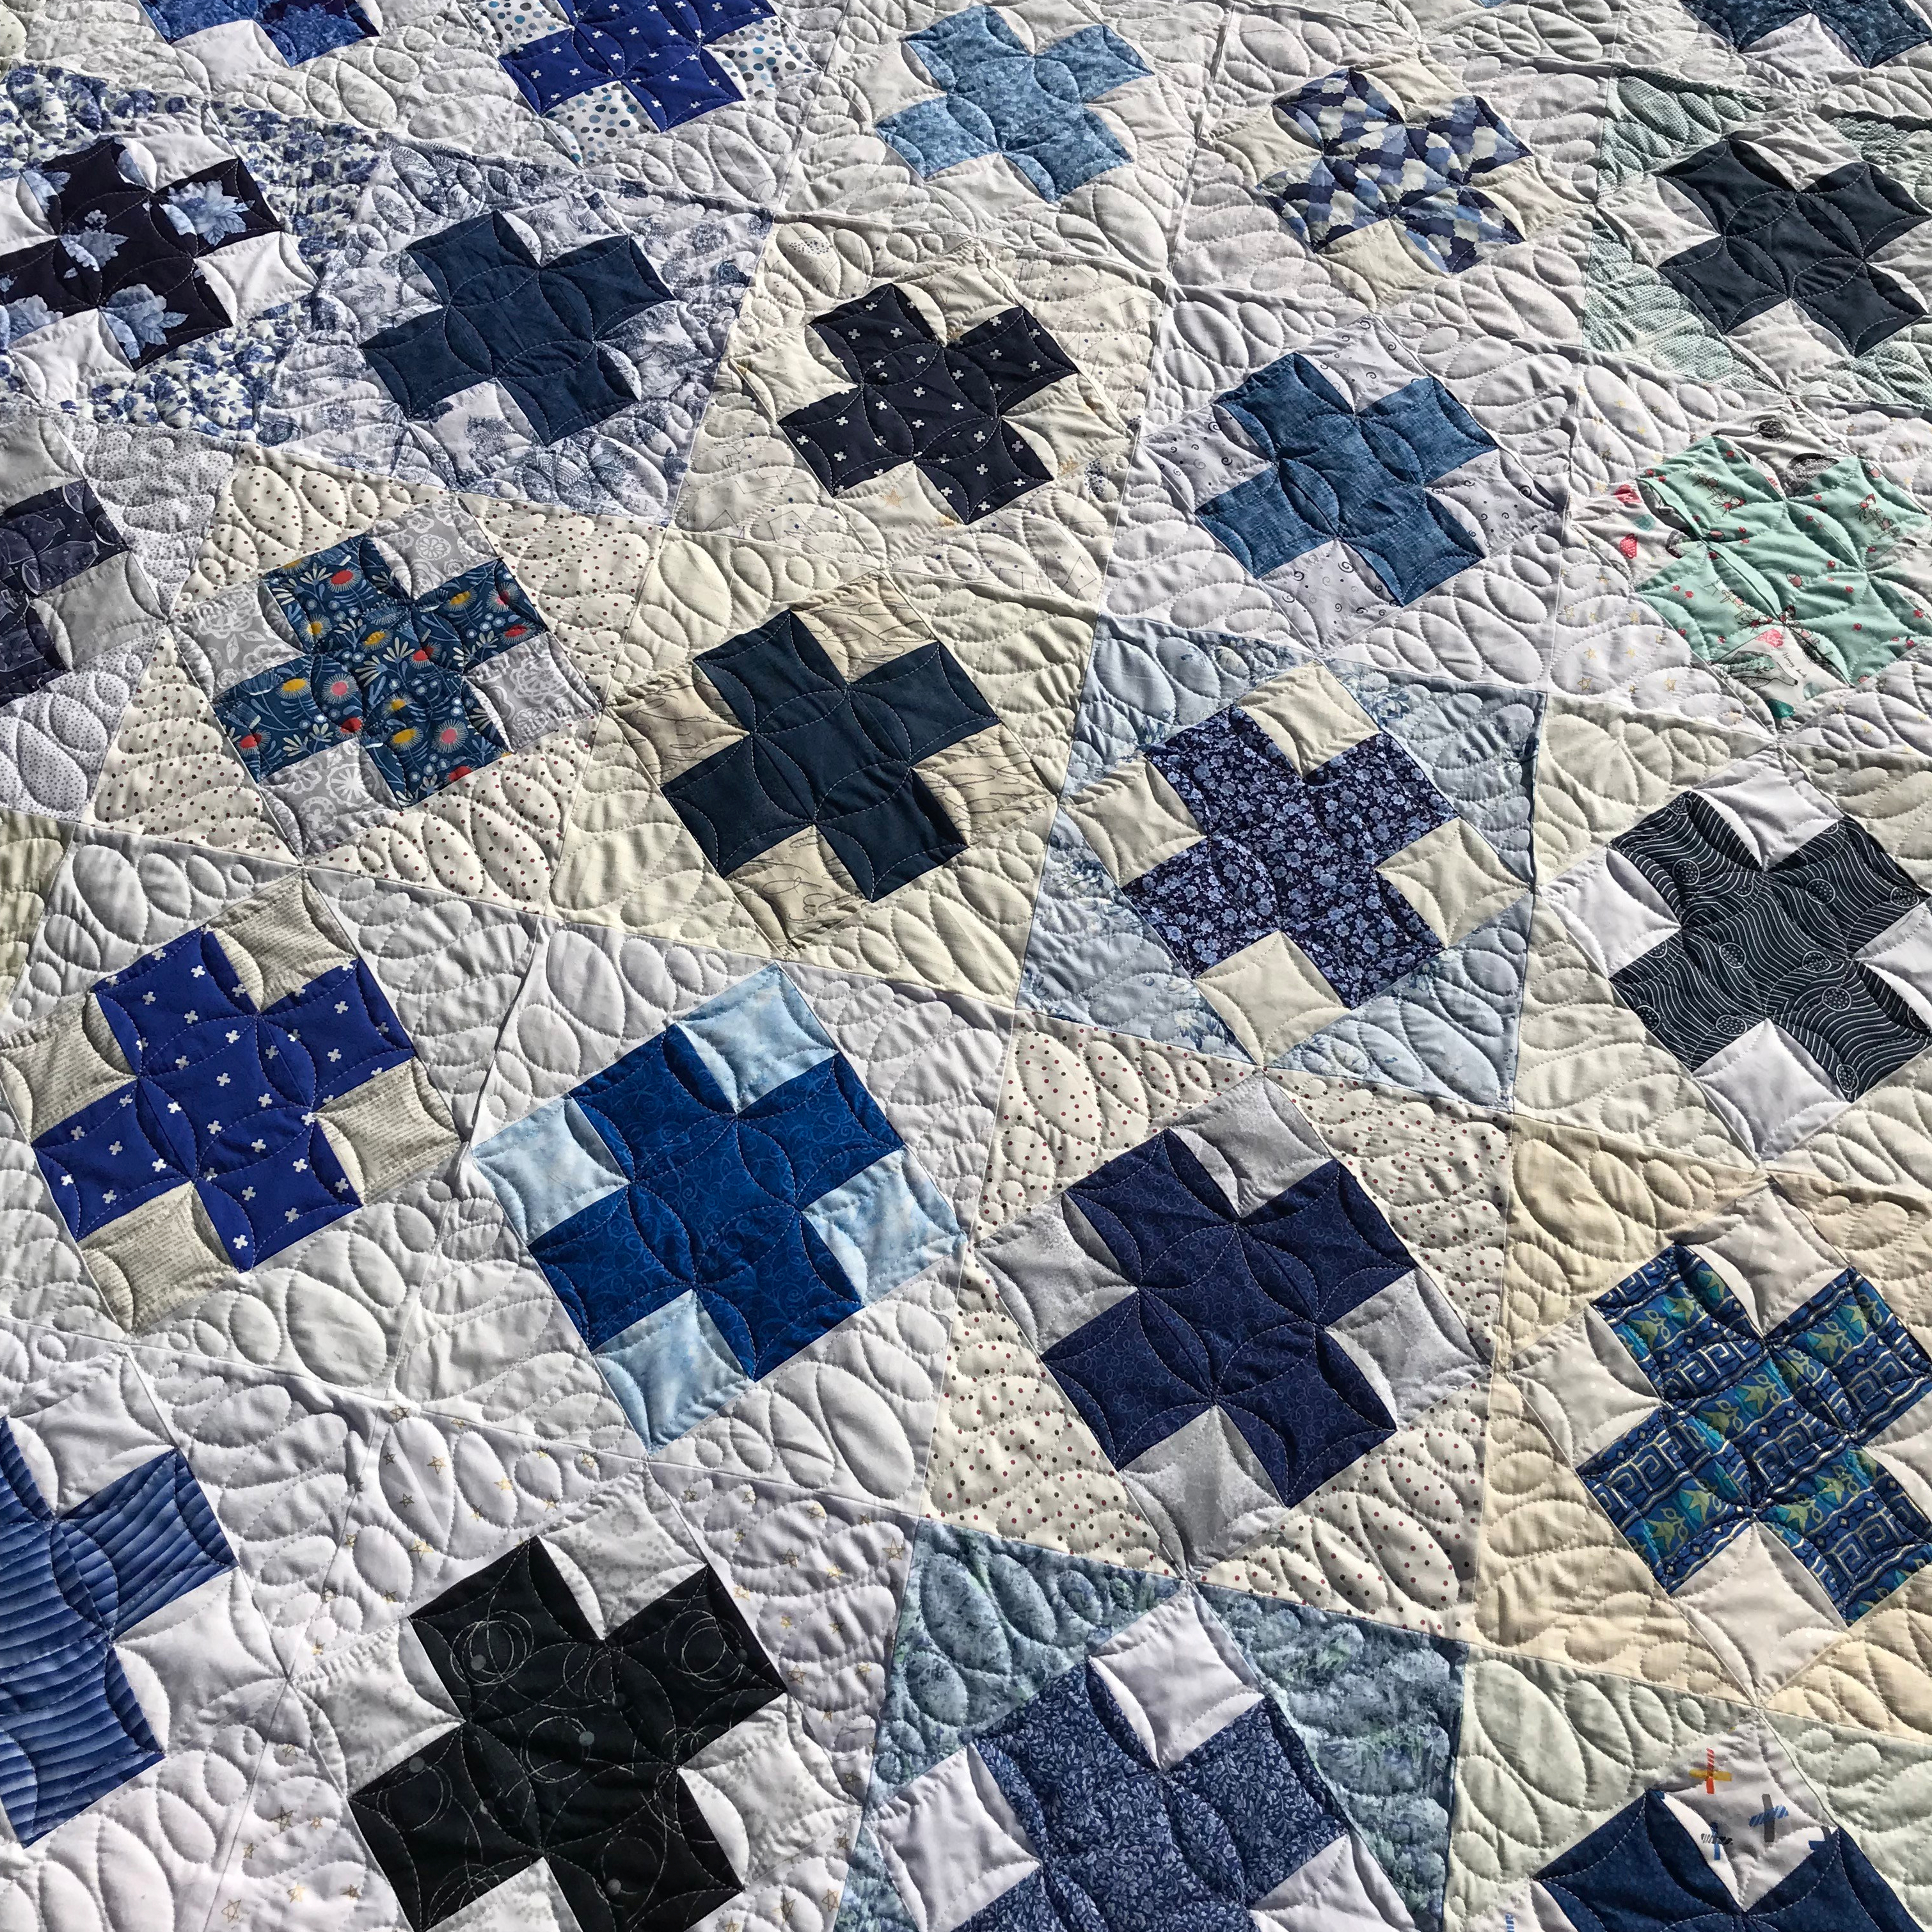 Custom quilting on a Blue Blocks quilt for Crafty Cop charity quilt